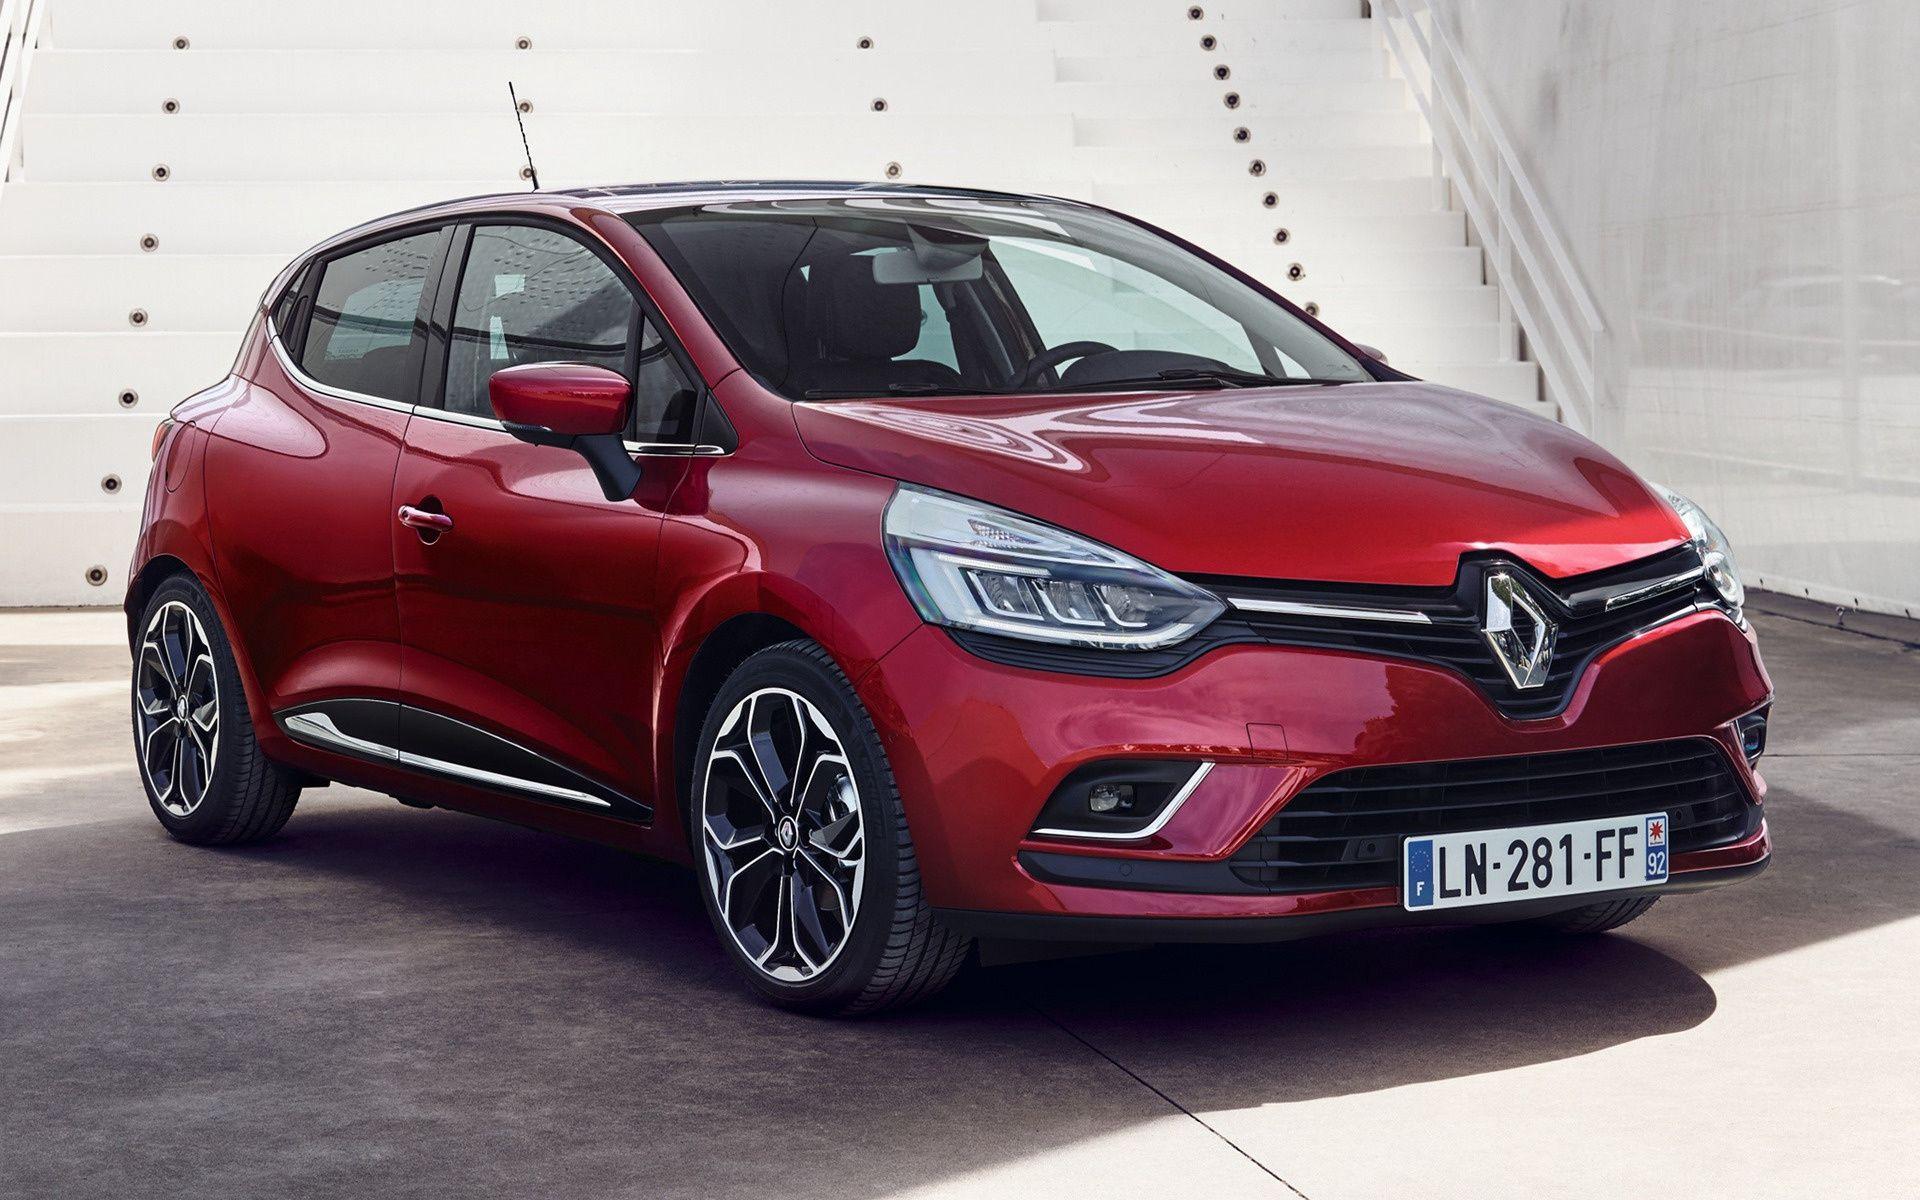 Renault Clio (2016) Wallpaper and HD Image